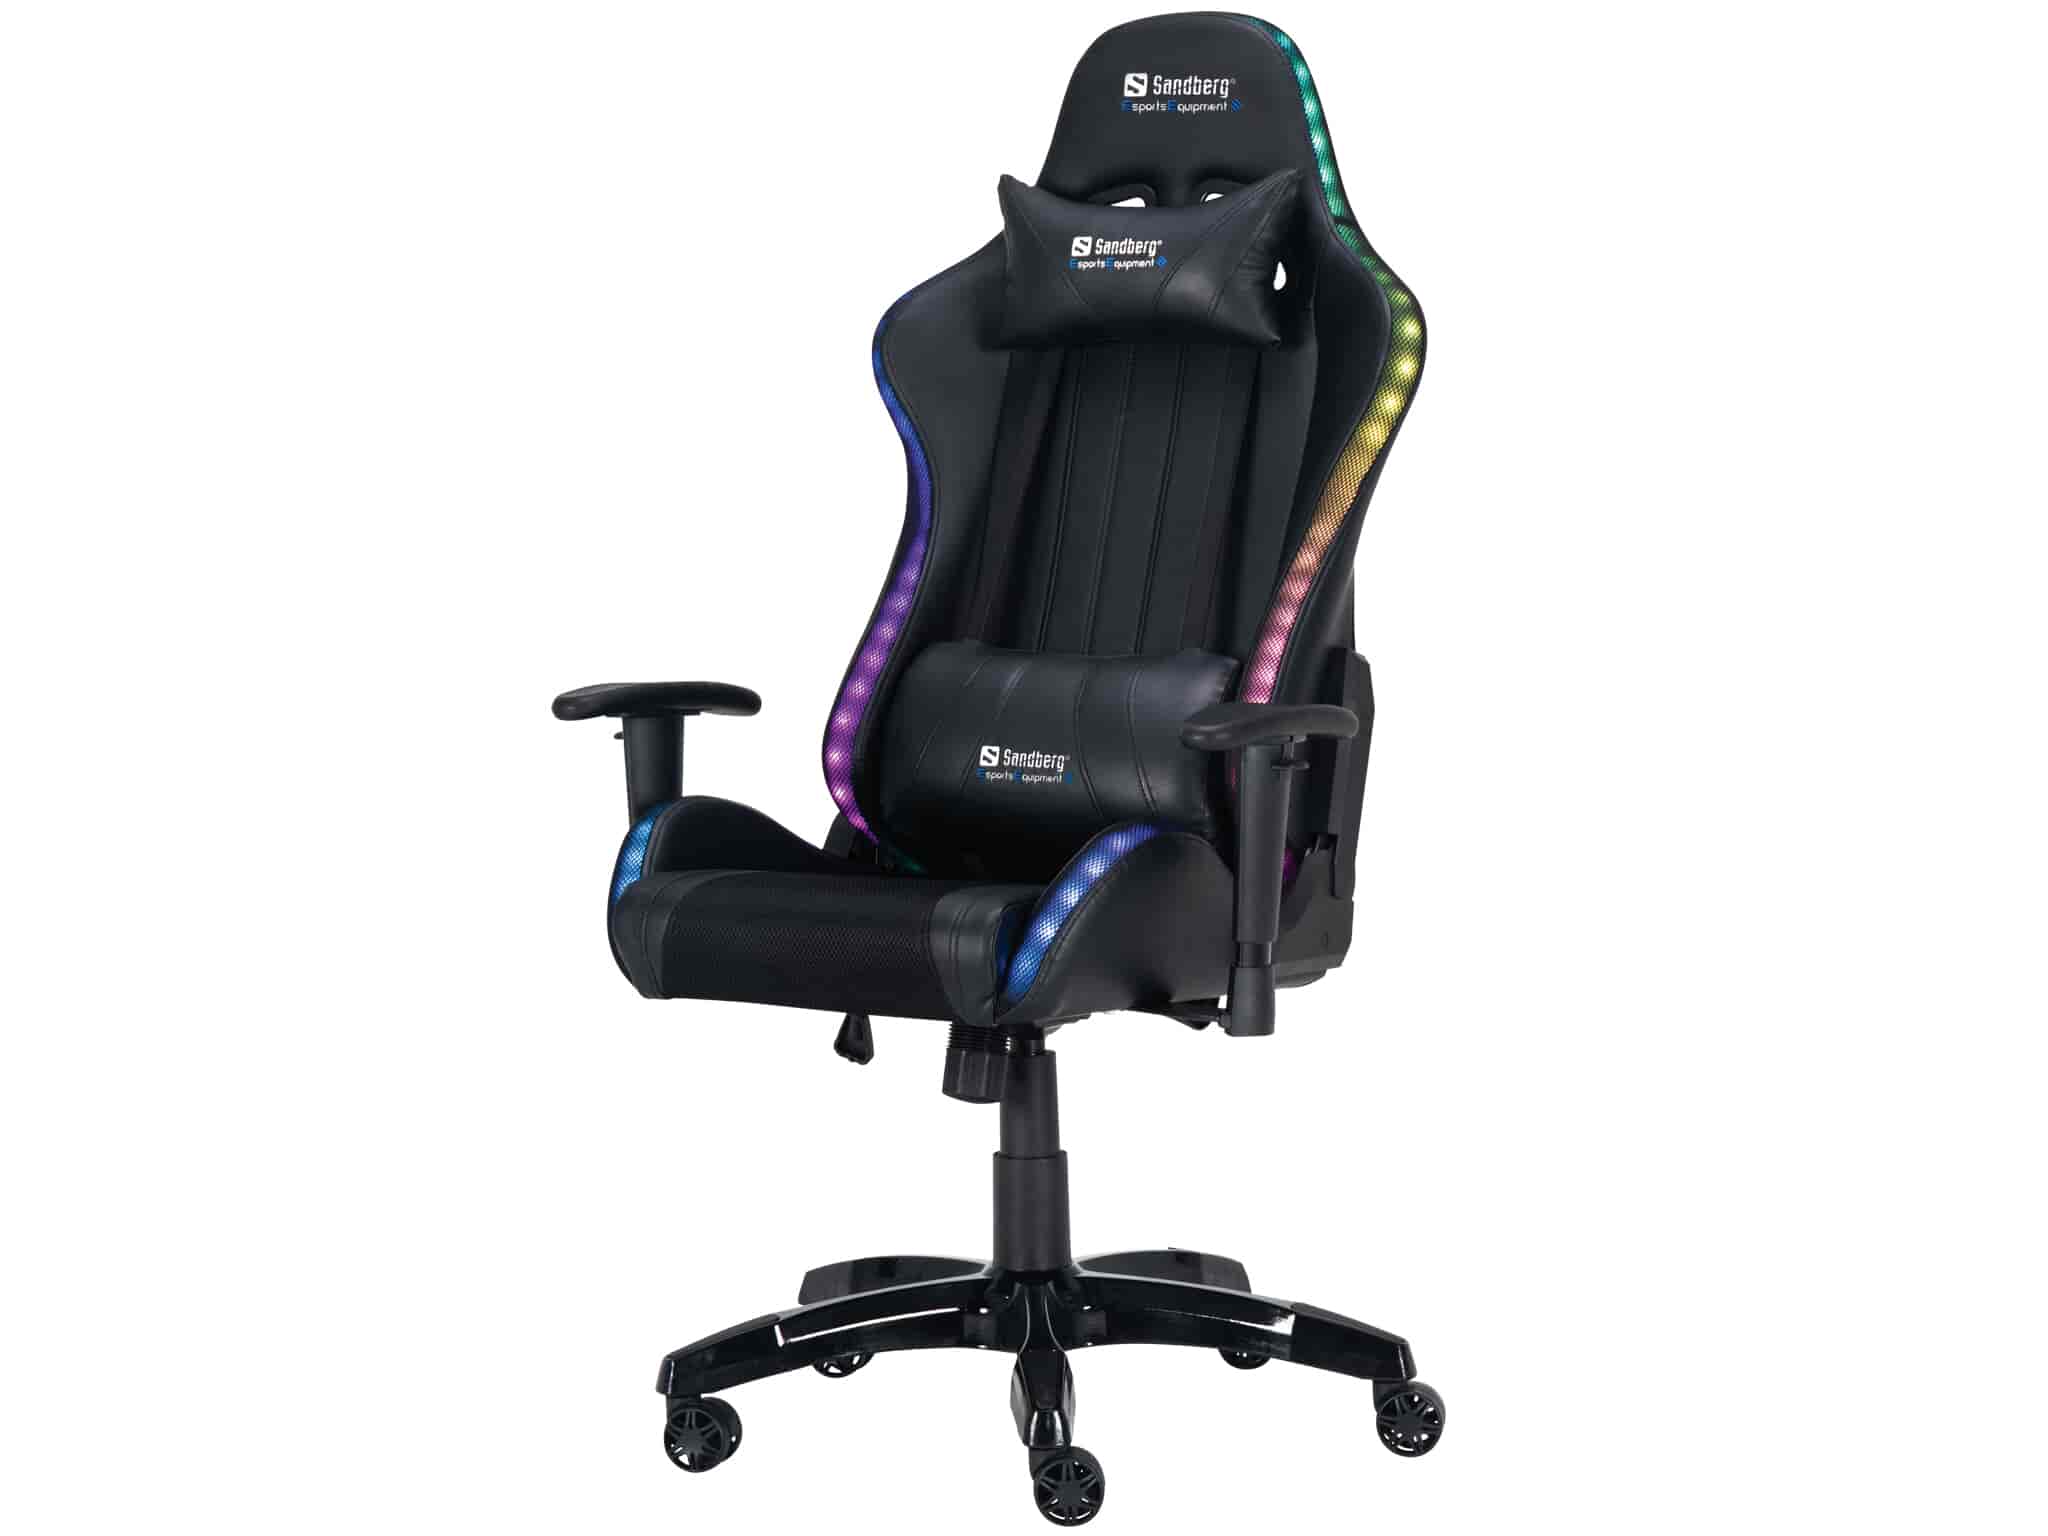 Sandberg Commander Gaming Chair RGBThe Sandberg Commander Gaming Chair RGB puts the finishing touches on any gaming setup. The gaming chair is embedded with RGB LED strips in the backrest and seat. You can choose from the full colour palette with hundreds of settings to play with on the remote included. The light is powered by a powerbank (not included), which can be placed in a pocket under the seat. The gaming chair is made of shiny PU leather, and there are also adjustable and removable cushions for your neck and back. Numerous position options enables you to optimise the chair to the most comfortable position for you.Sandberg